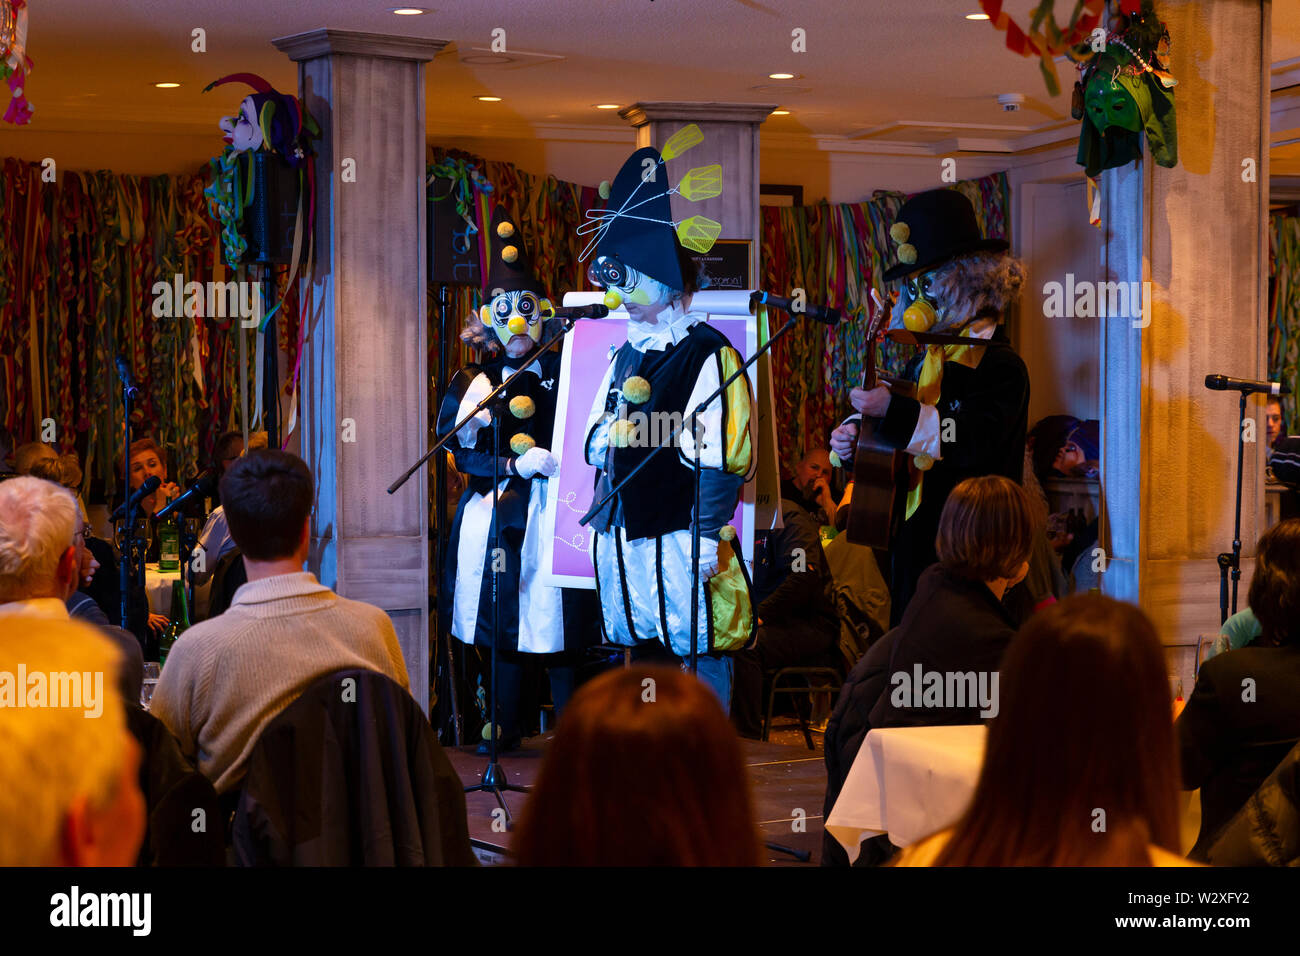 Basel, Switzerland - March 11th, 2019. The carnival Schnitzelbaenggler group called Drey Daags Fliege performing their parody poetry in a restaurant Stock Photo